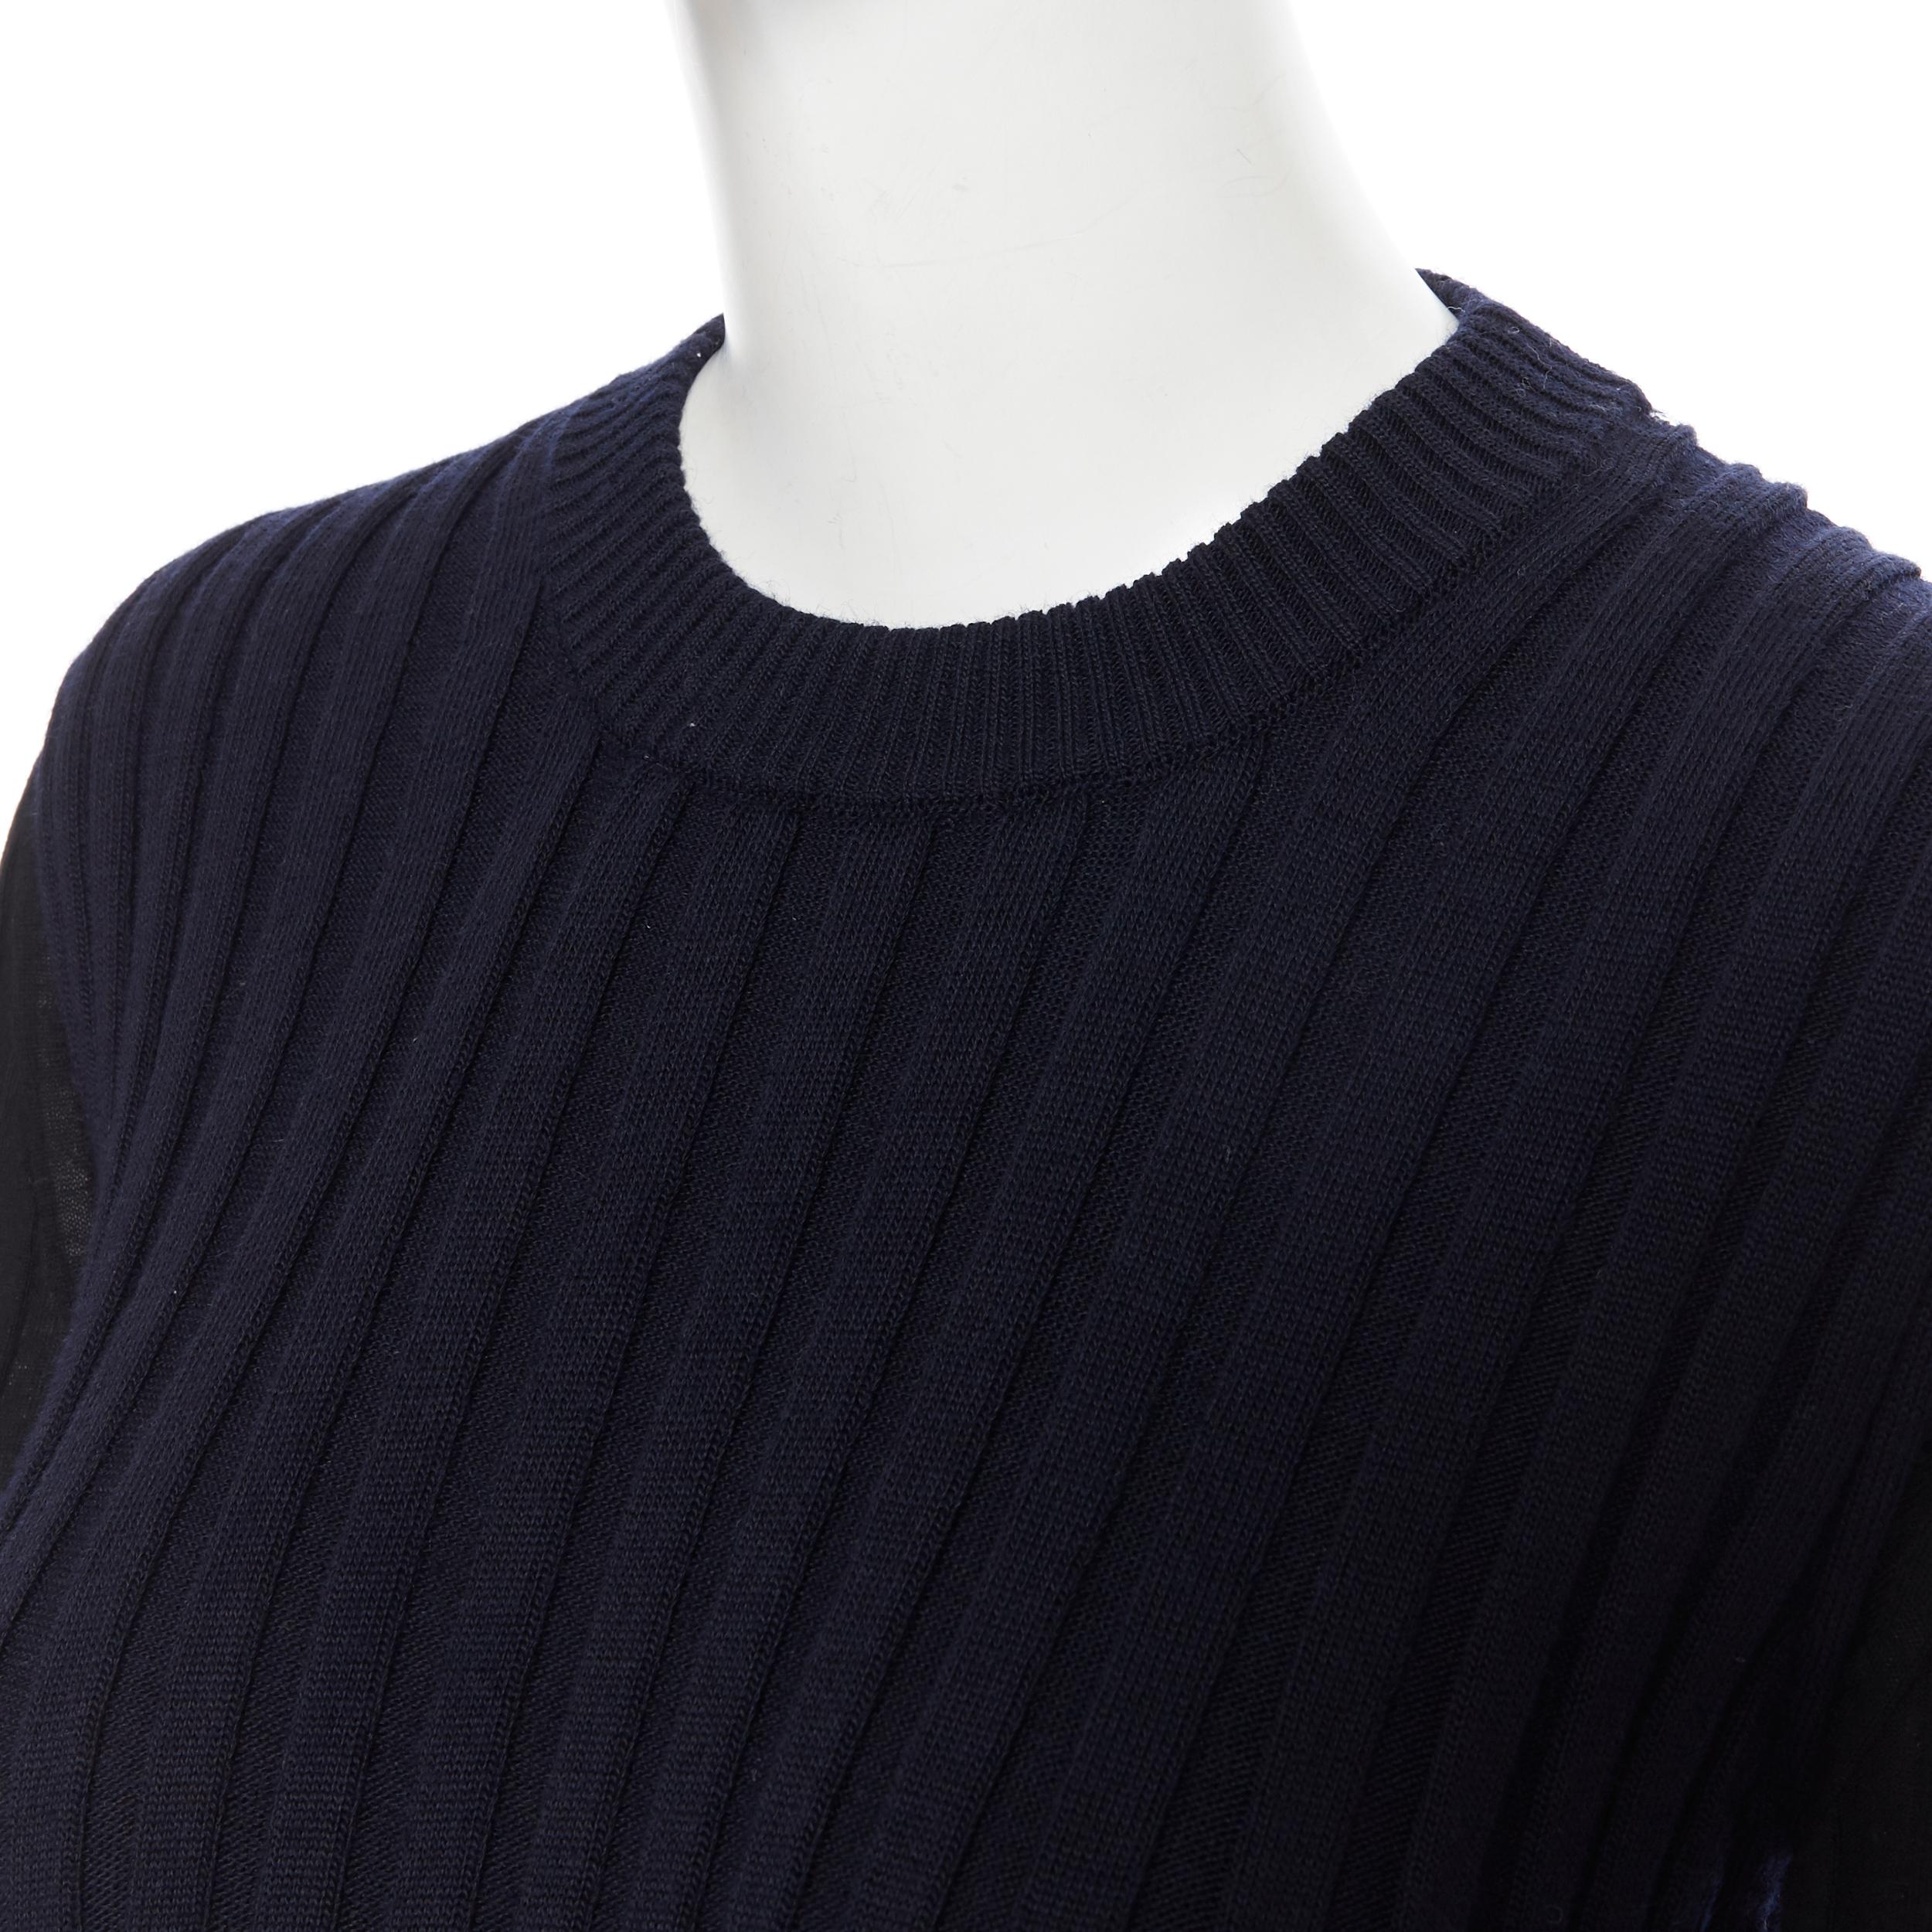 runway OLD CELINE PHOEBE PHILO black ribbed knit dual pocket flared cuff top XS 2